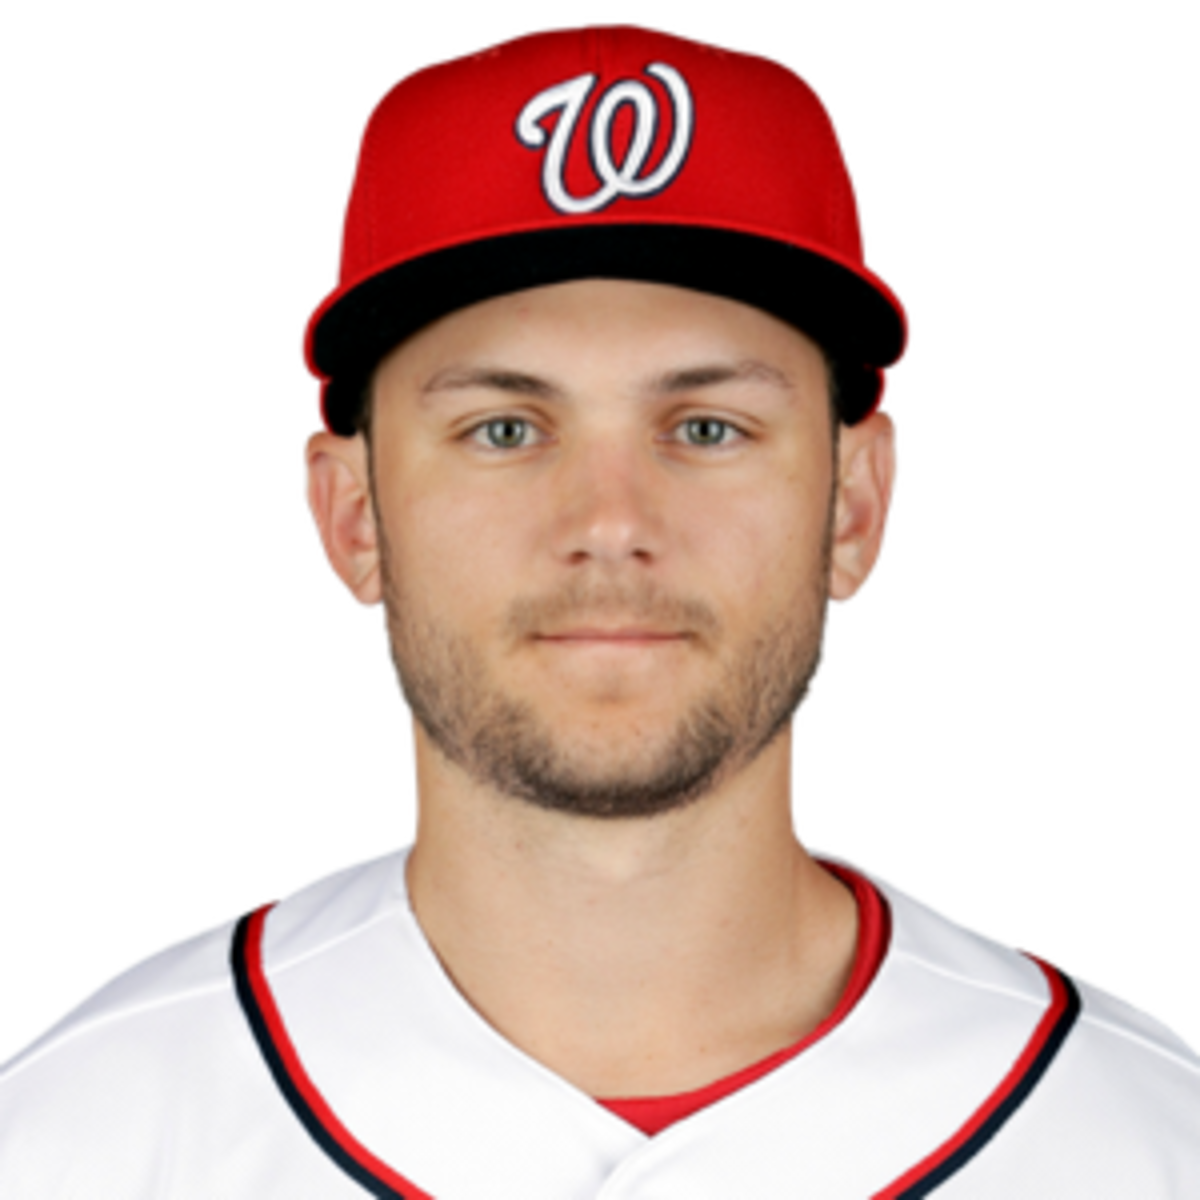 Team Trea Turner  Birthday boy Trea Turner got quite the gift with his own  MLB dream team in The Show 18. Can your squad measure up to his? Find out  and